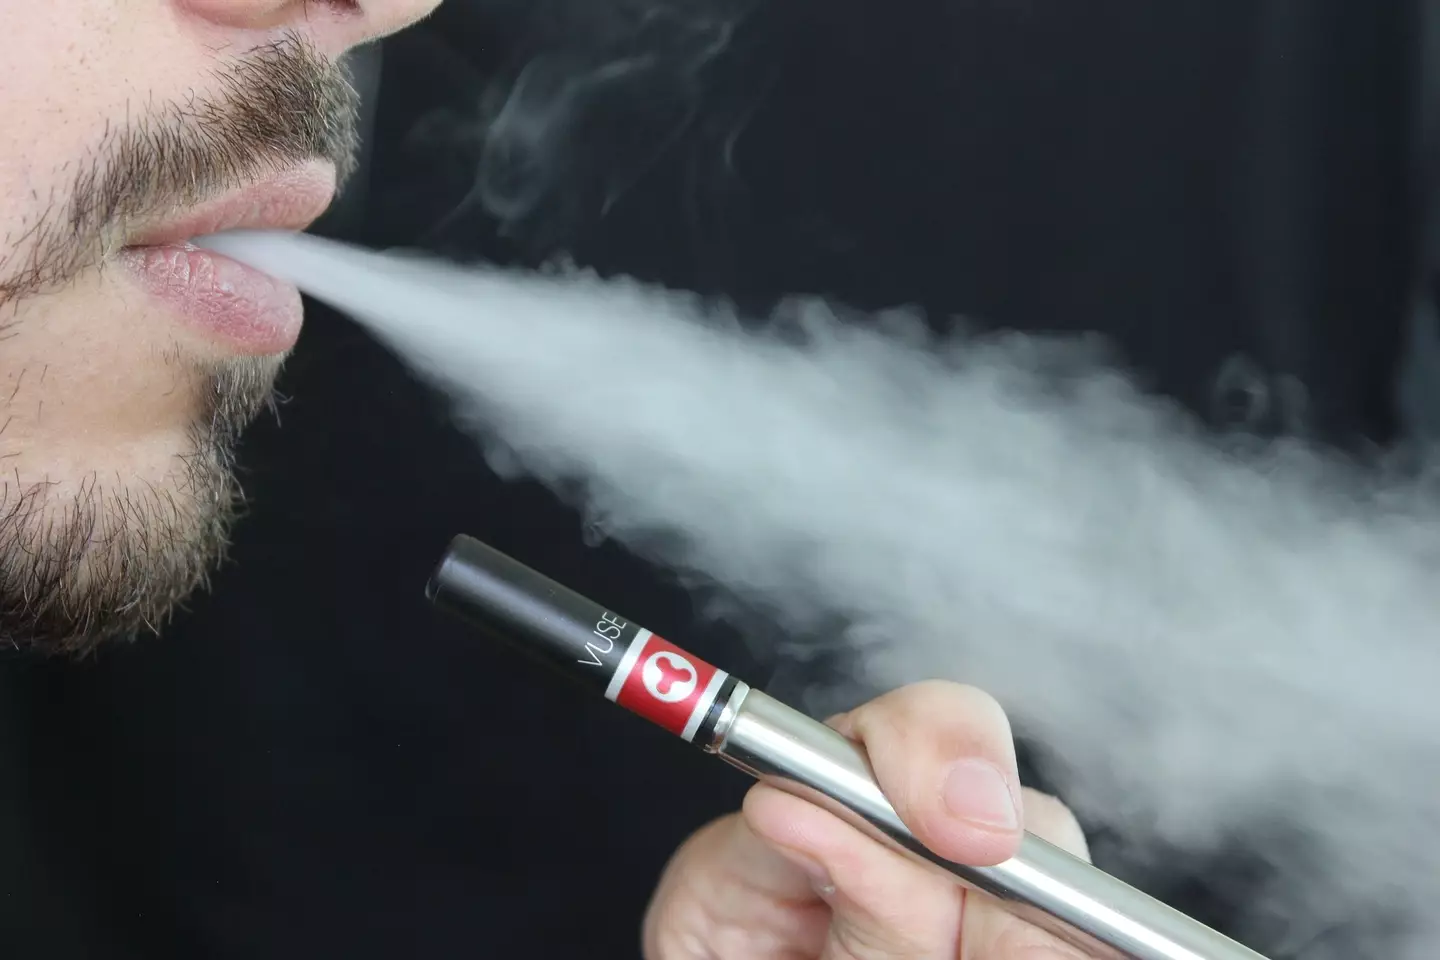 The government has said it will give out one million free vapes to smokers.